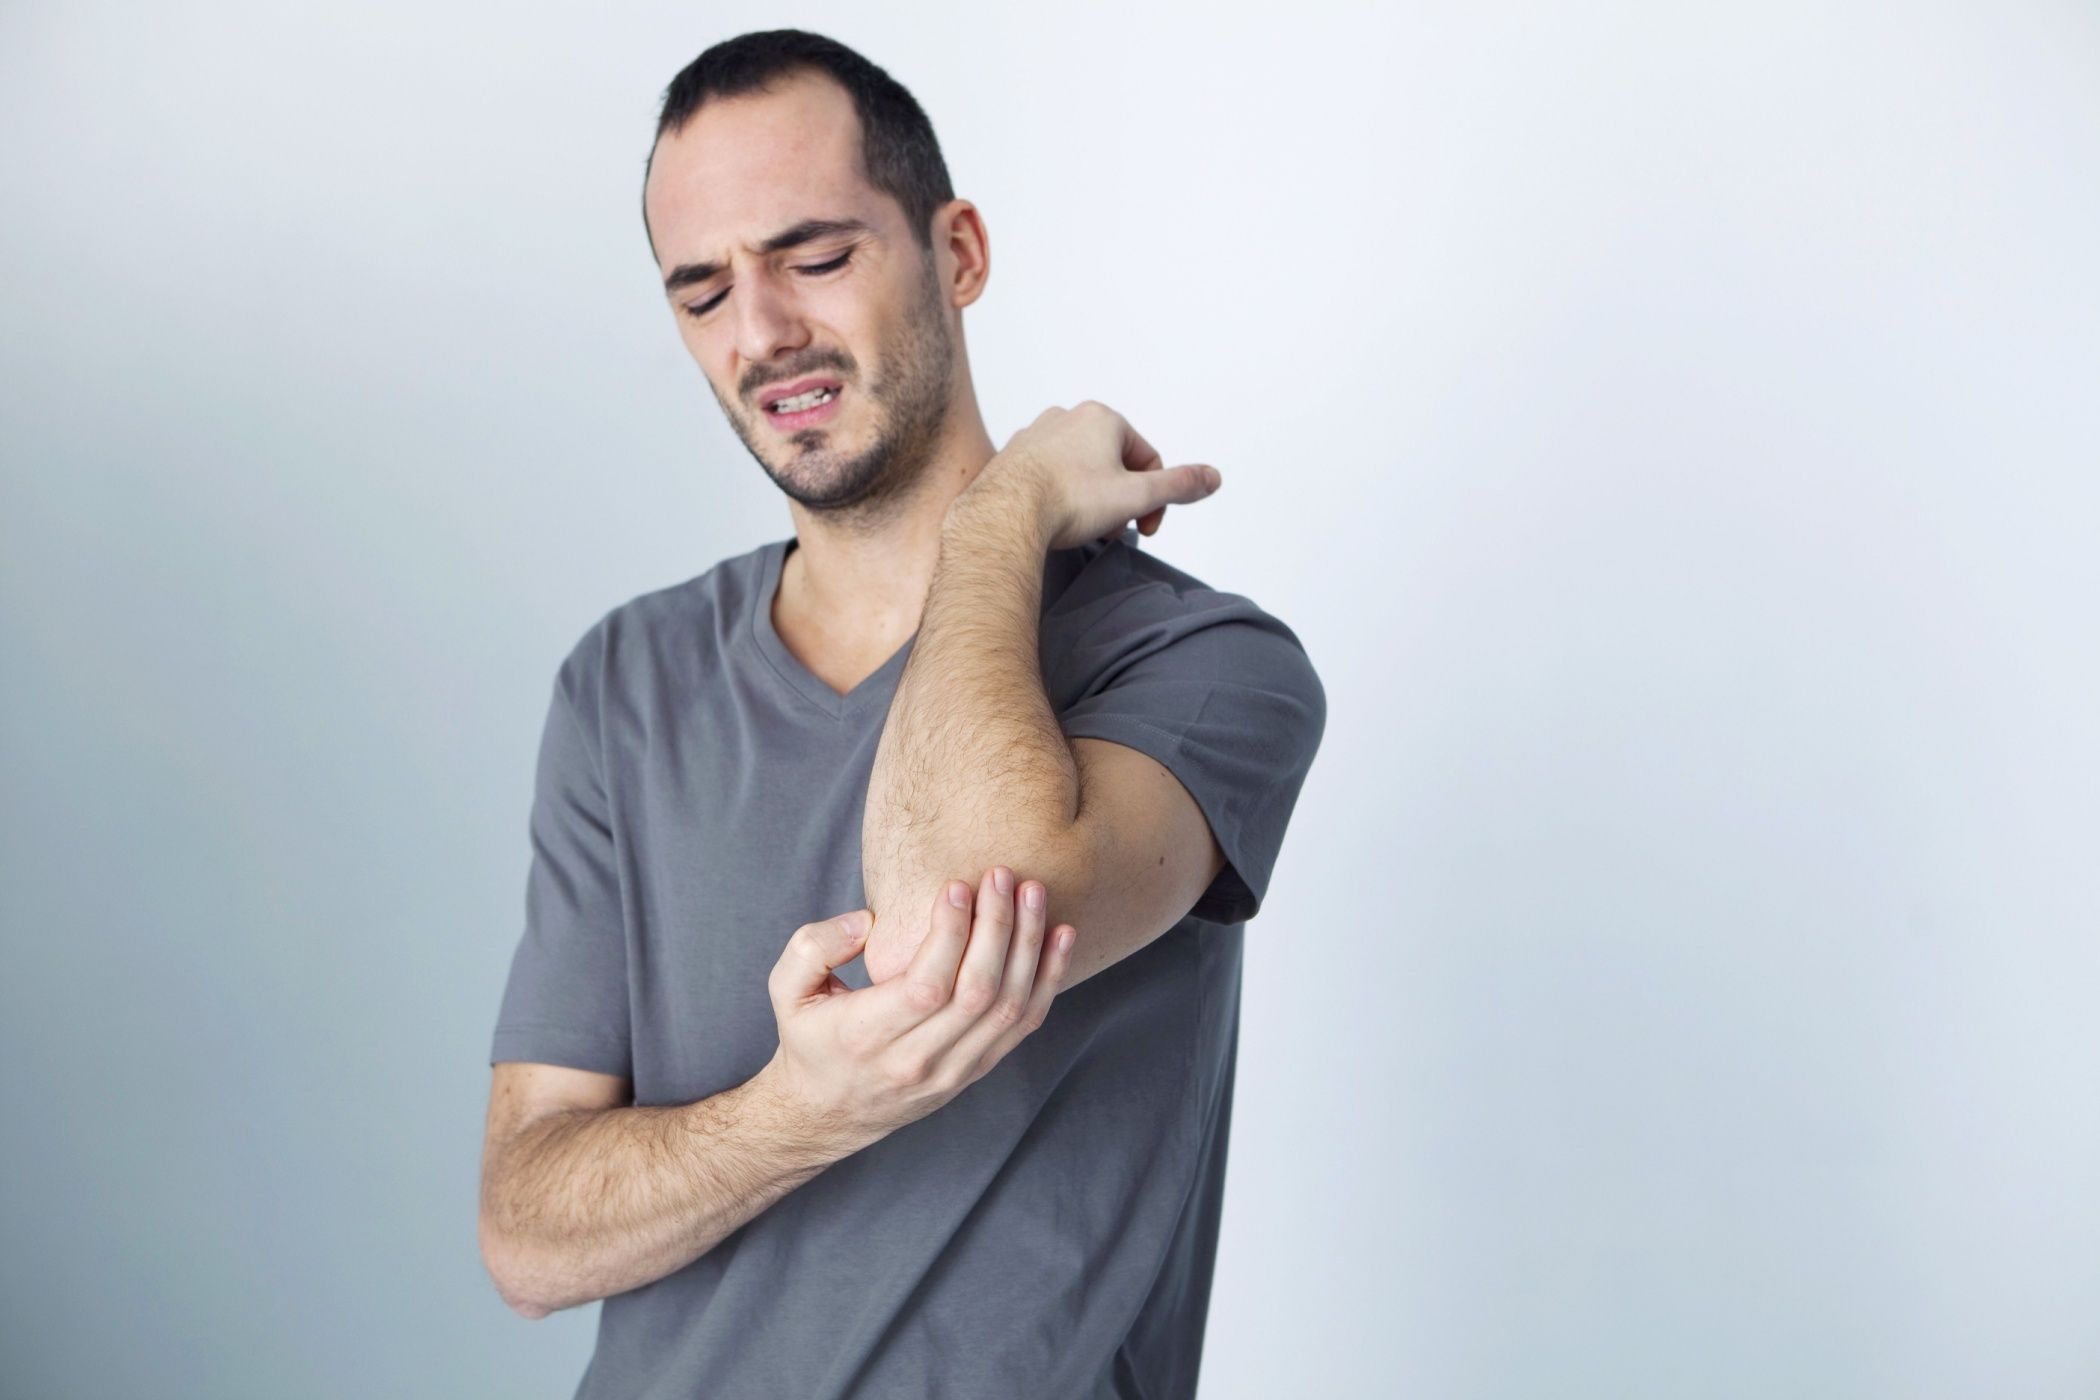 Man with painful elbow